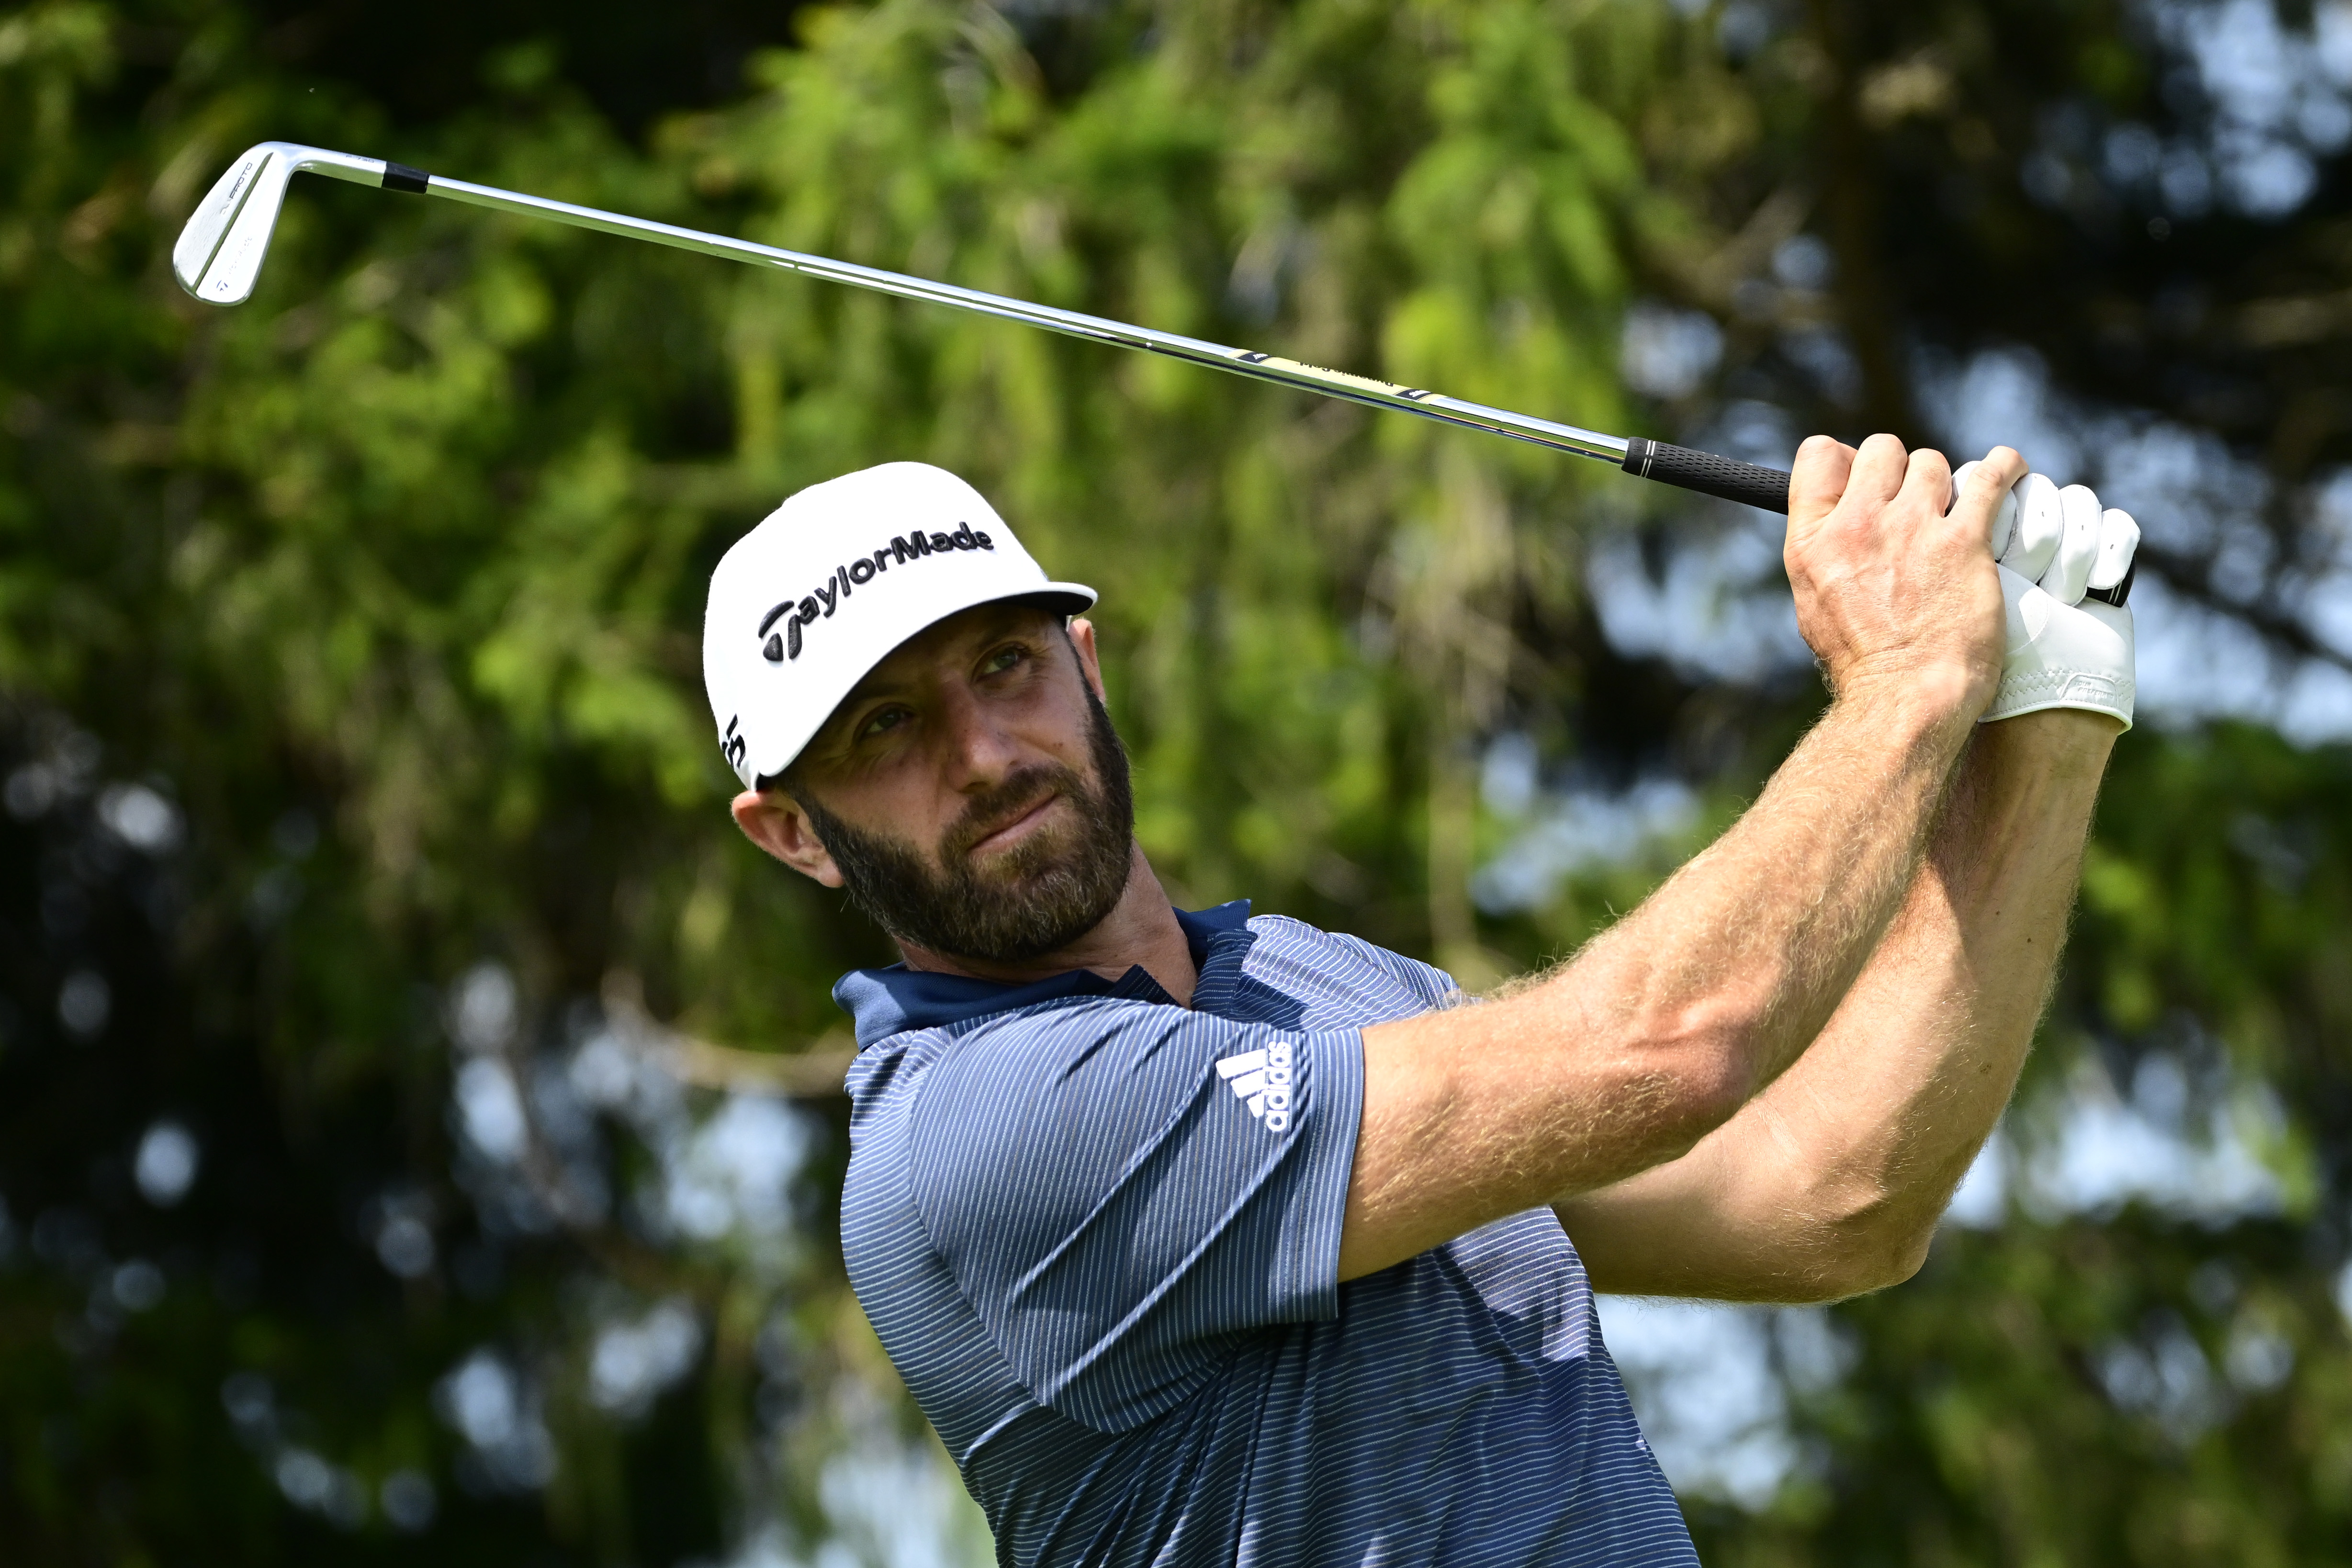 Team Captain Dustin Johnson of 4 Aces GC plays his shot on the third tee during Day One of the LIV Golf Invitational - Chicago at Rich Harvest Farms on September 16, 2022 in Sugar Grove, Illinois. (Photo by Quinn Harris/Getty Images)